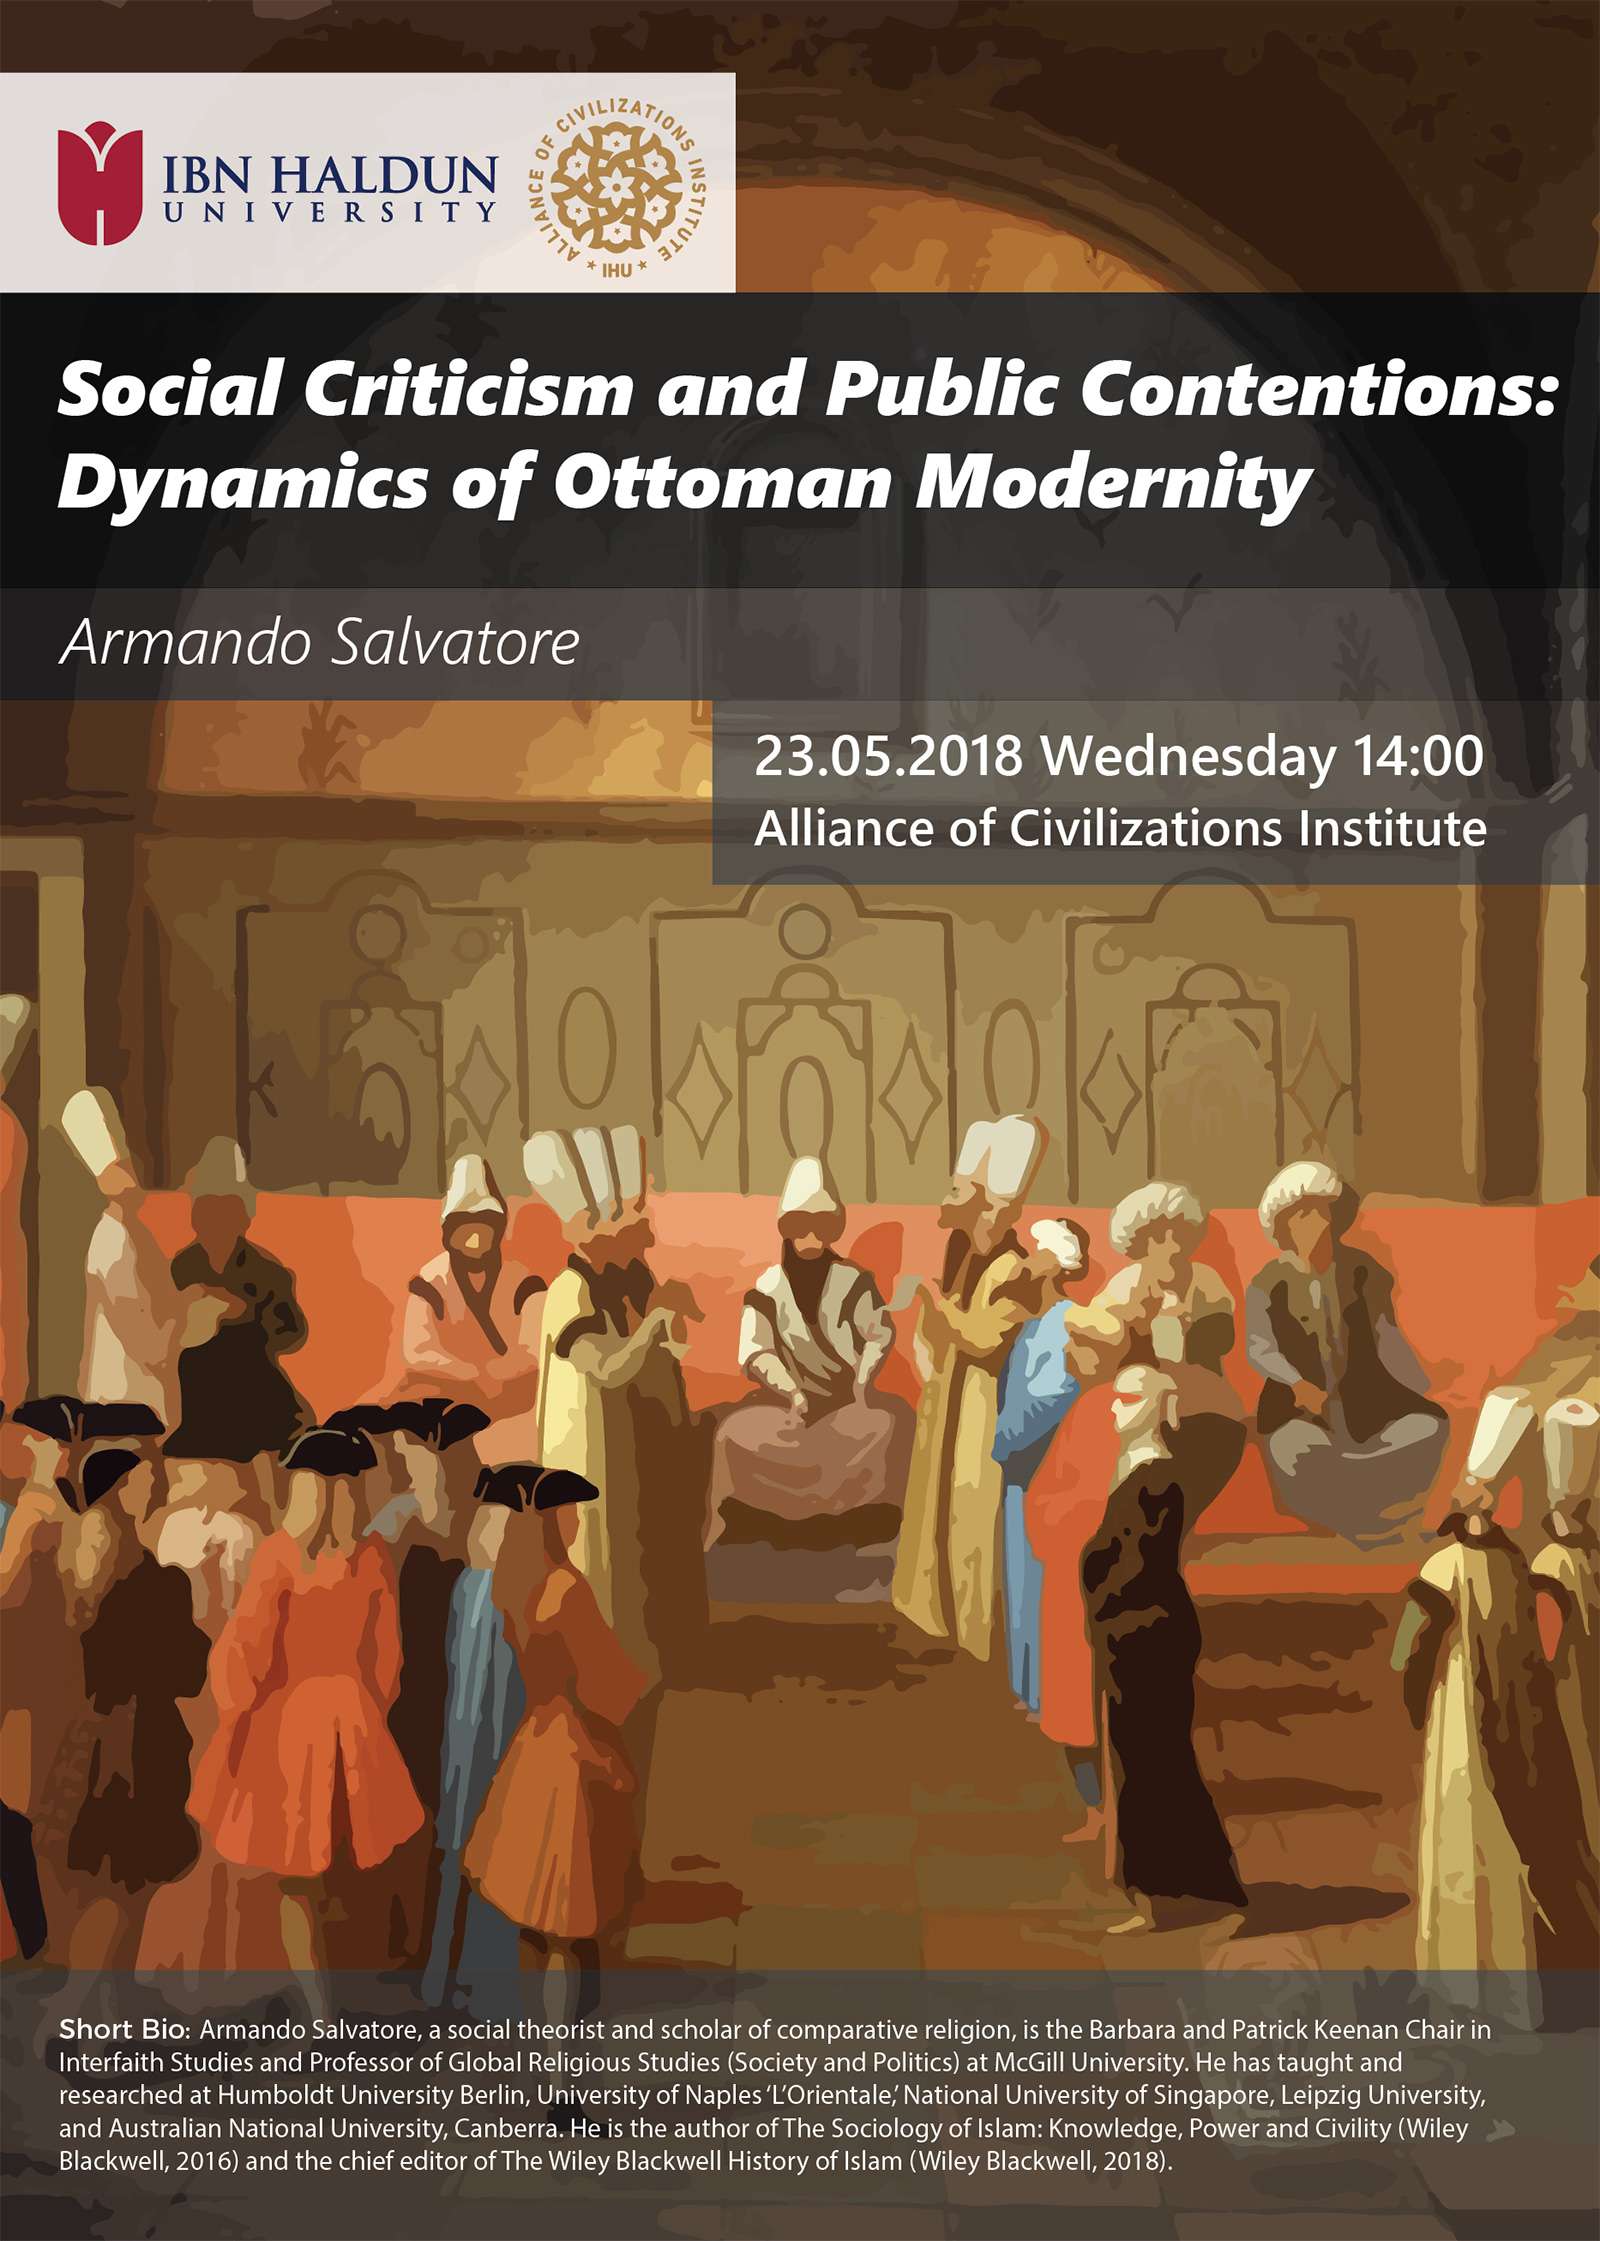 Social Criticism and Public Contentions: Dynamics of Ottoman Modernity